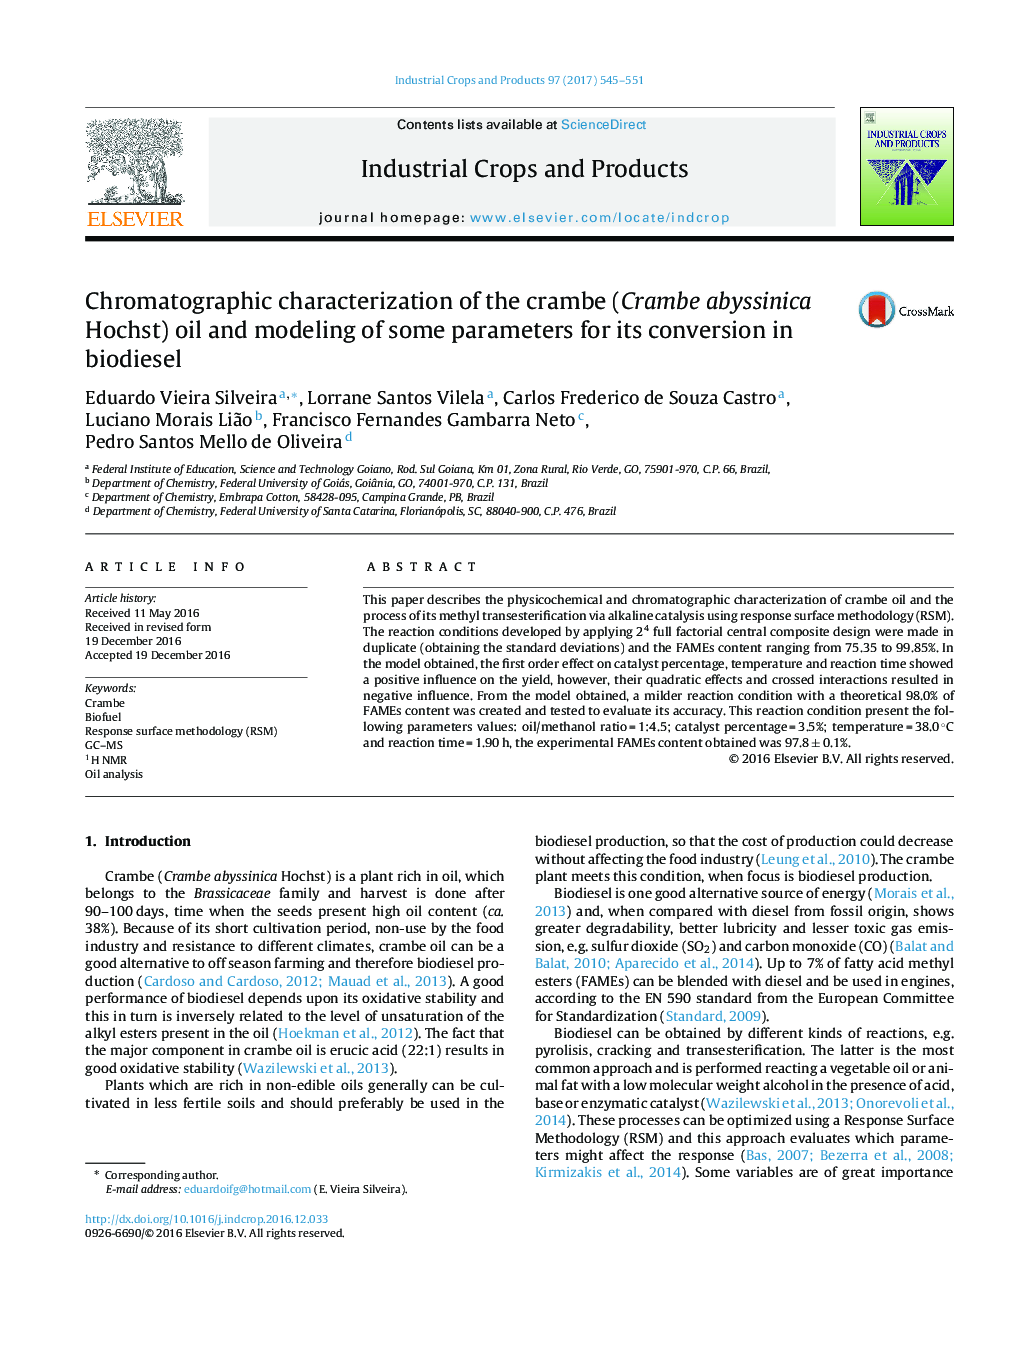 Chromatographic characterization of the crambe (Crambe abyssinica Hochst) oil and modeling of some parameters for its conversion in biodiesel